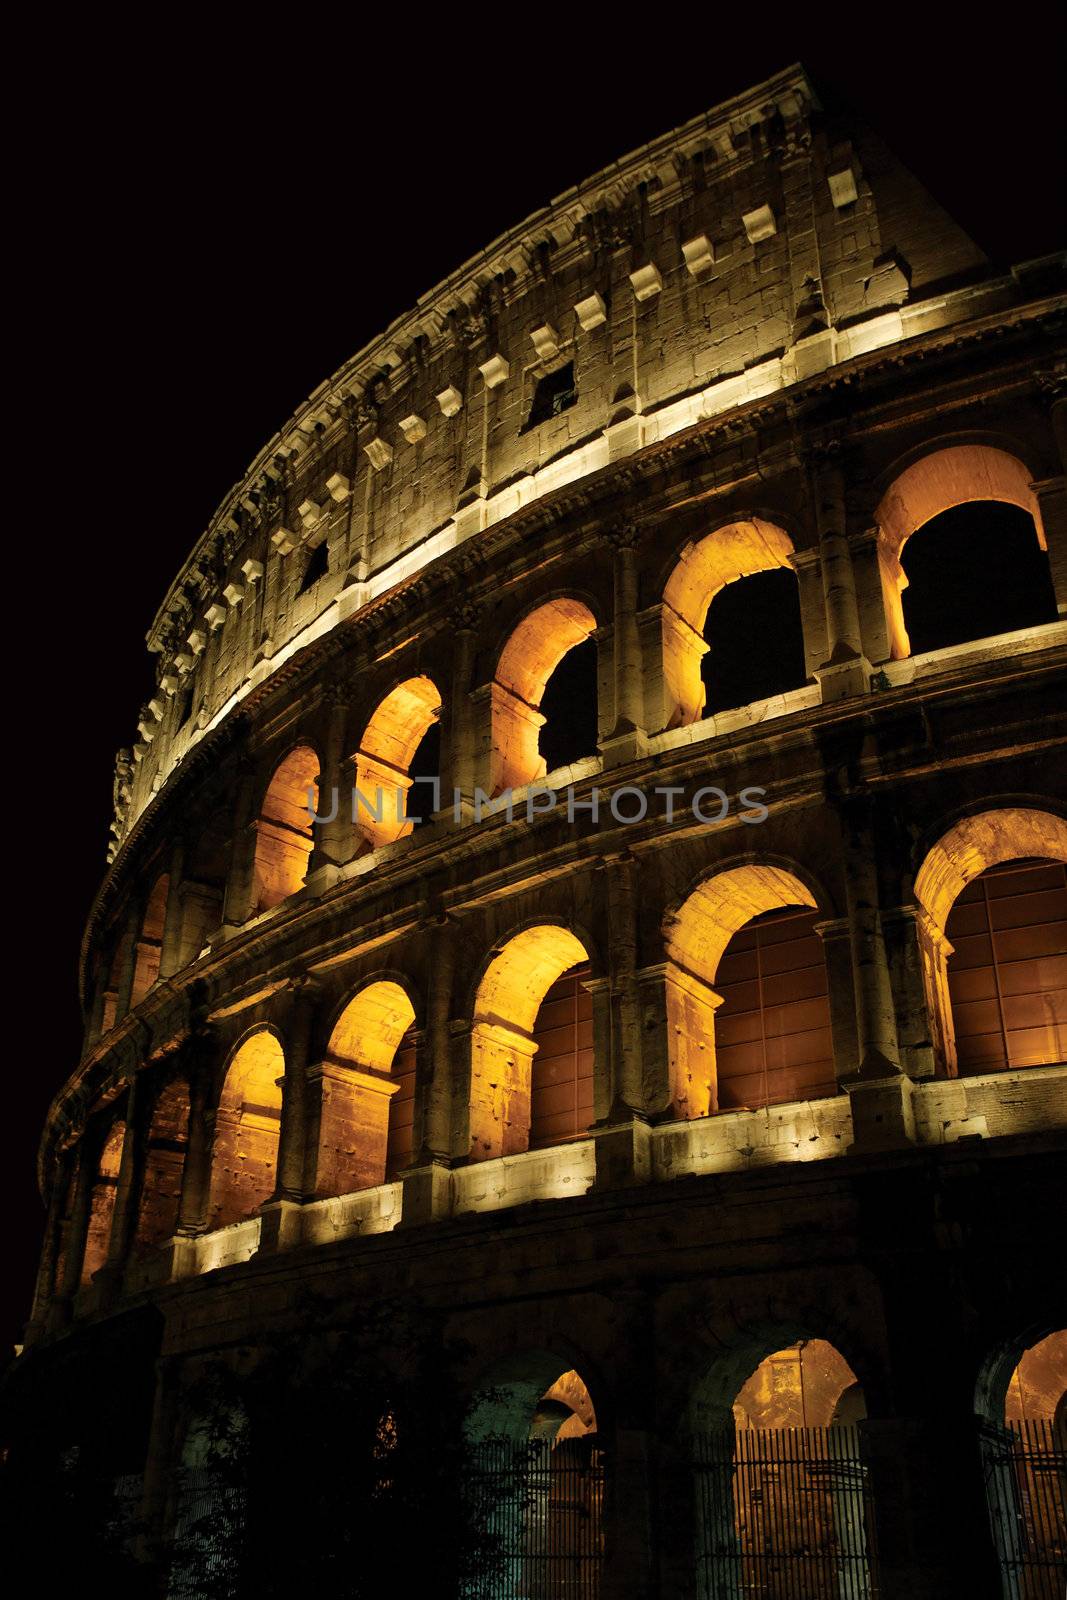 The Colosseum in Rome Italy at night.
